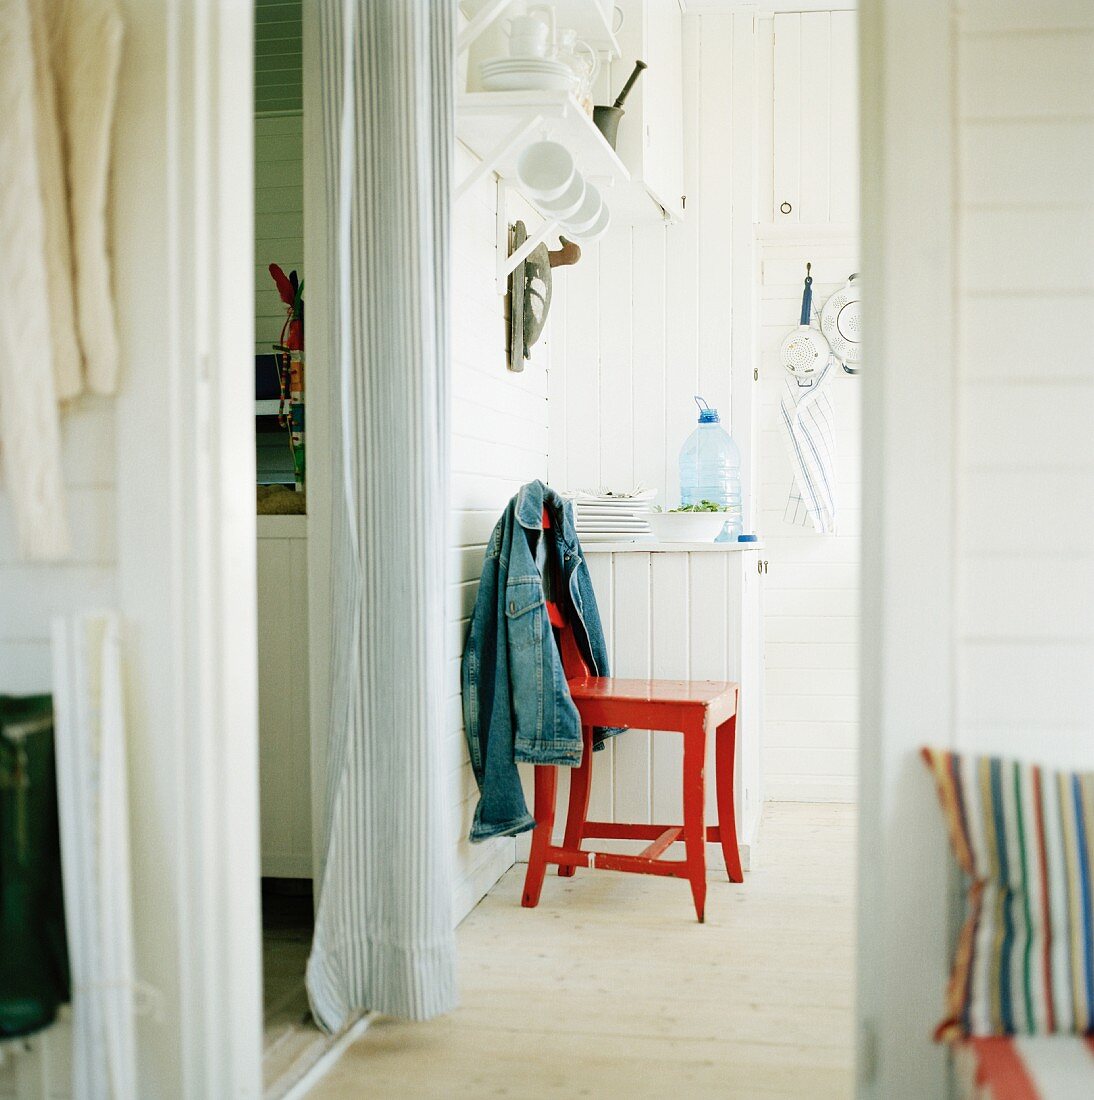 A red lacquered kitchen chair with a jacket hanging over the back next to a hallway with a white curtain